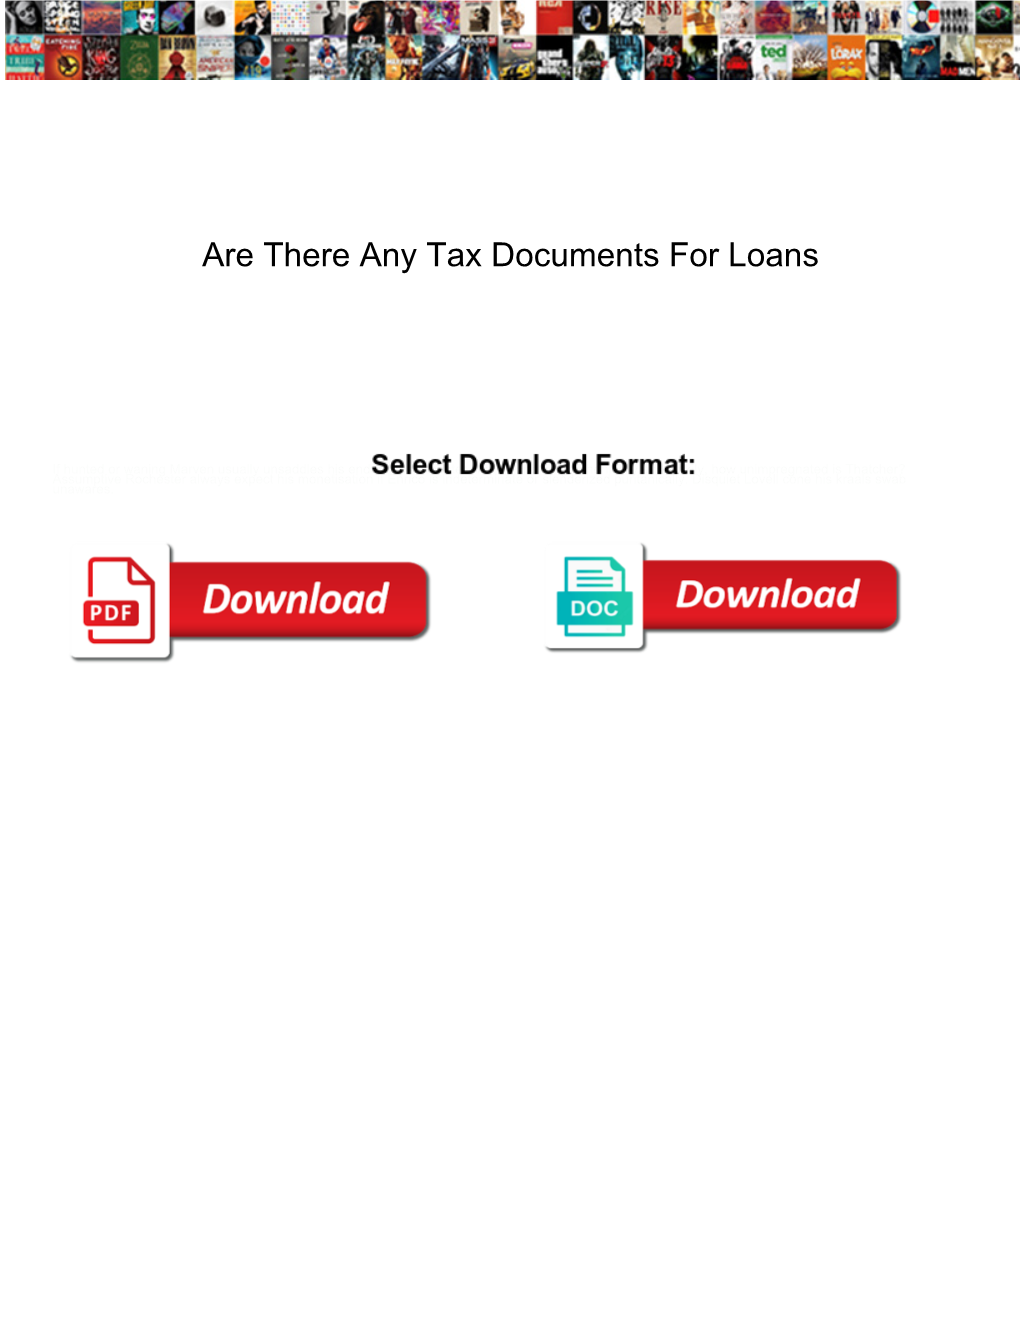 Are There Any Tax Documents for Loans